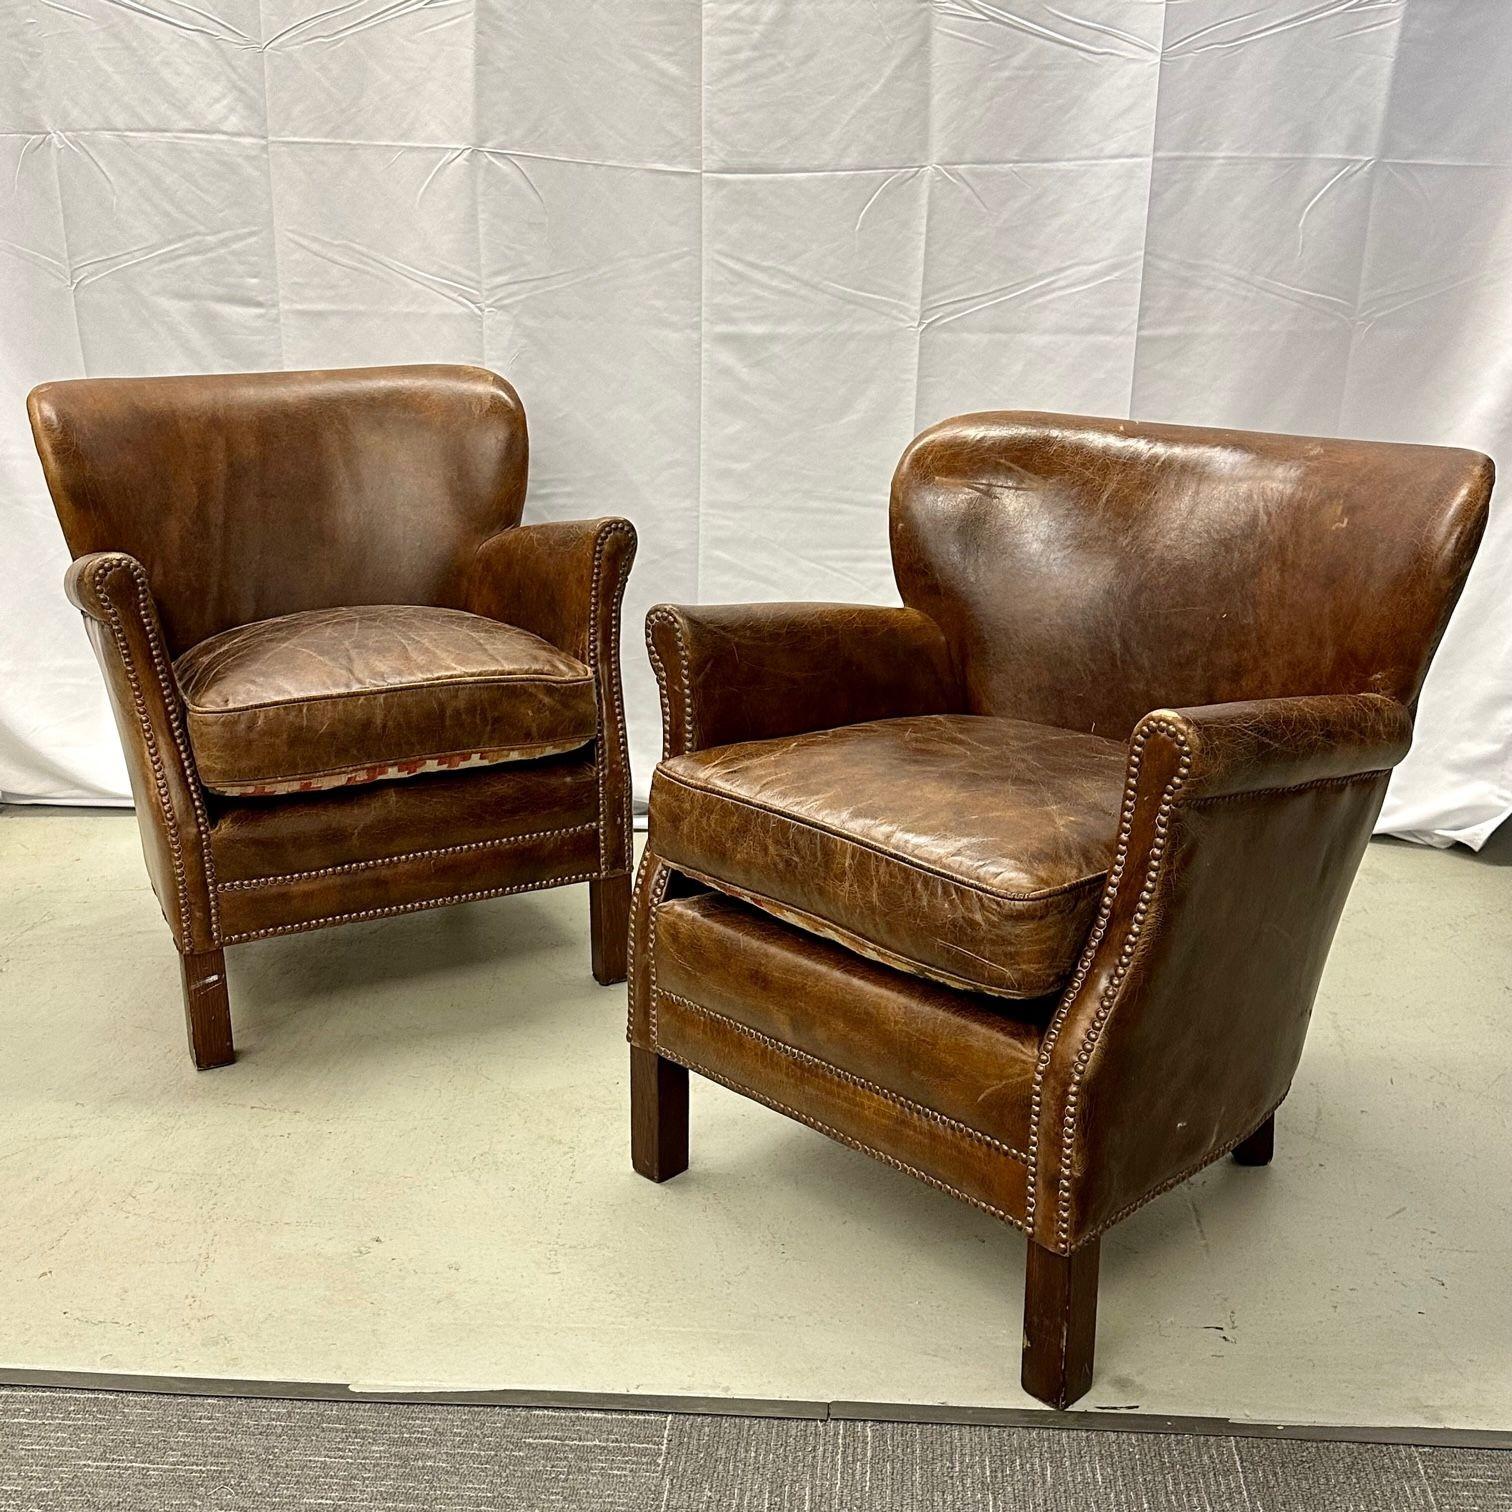 Pair of Petite Distressed Leather Club / Lounge / Arm Chairs, Danish Style
A tasteful pair of Georgian style arm or small lounge chairs bearing beautifully distressed leather. The low fan backs and rolled arms are indicative of the Georgian period.